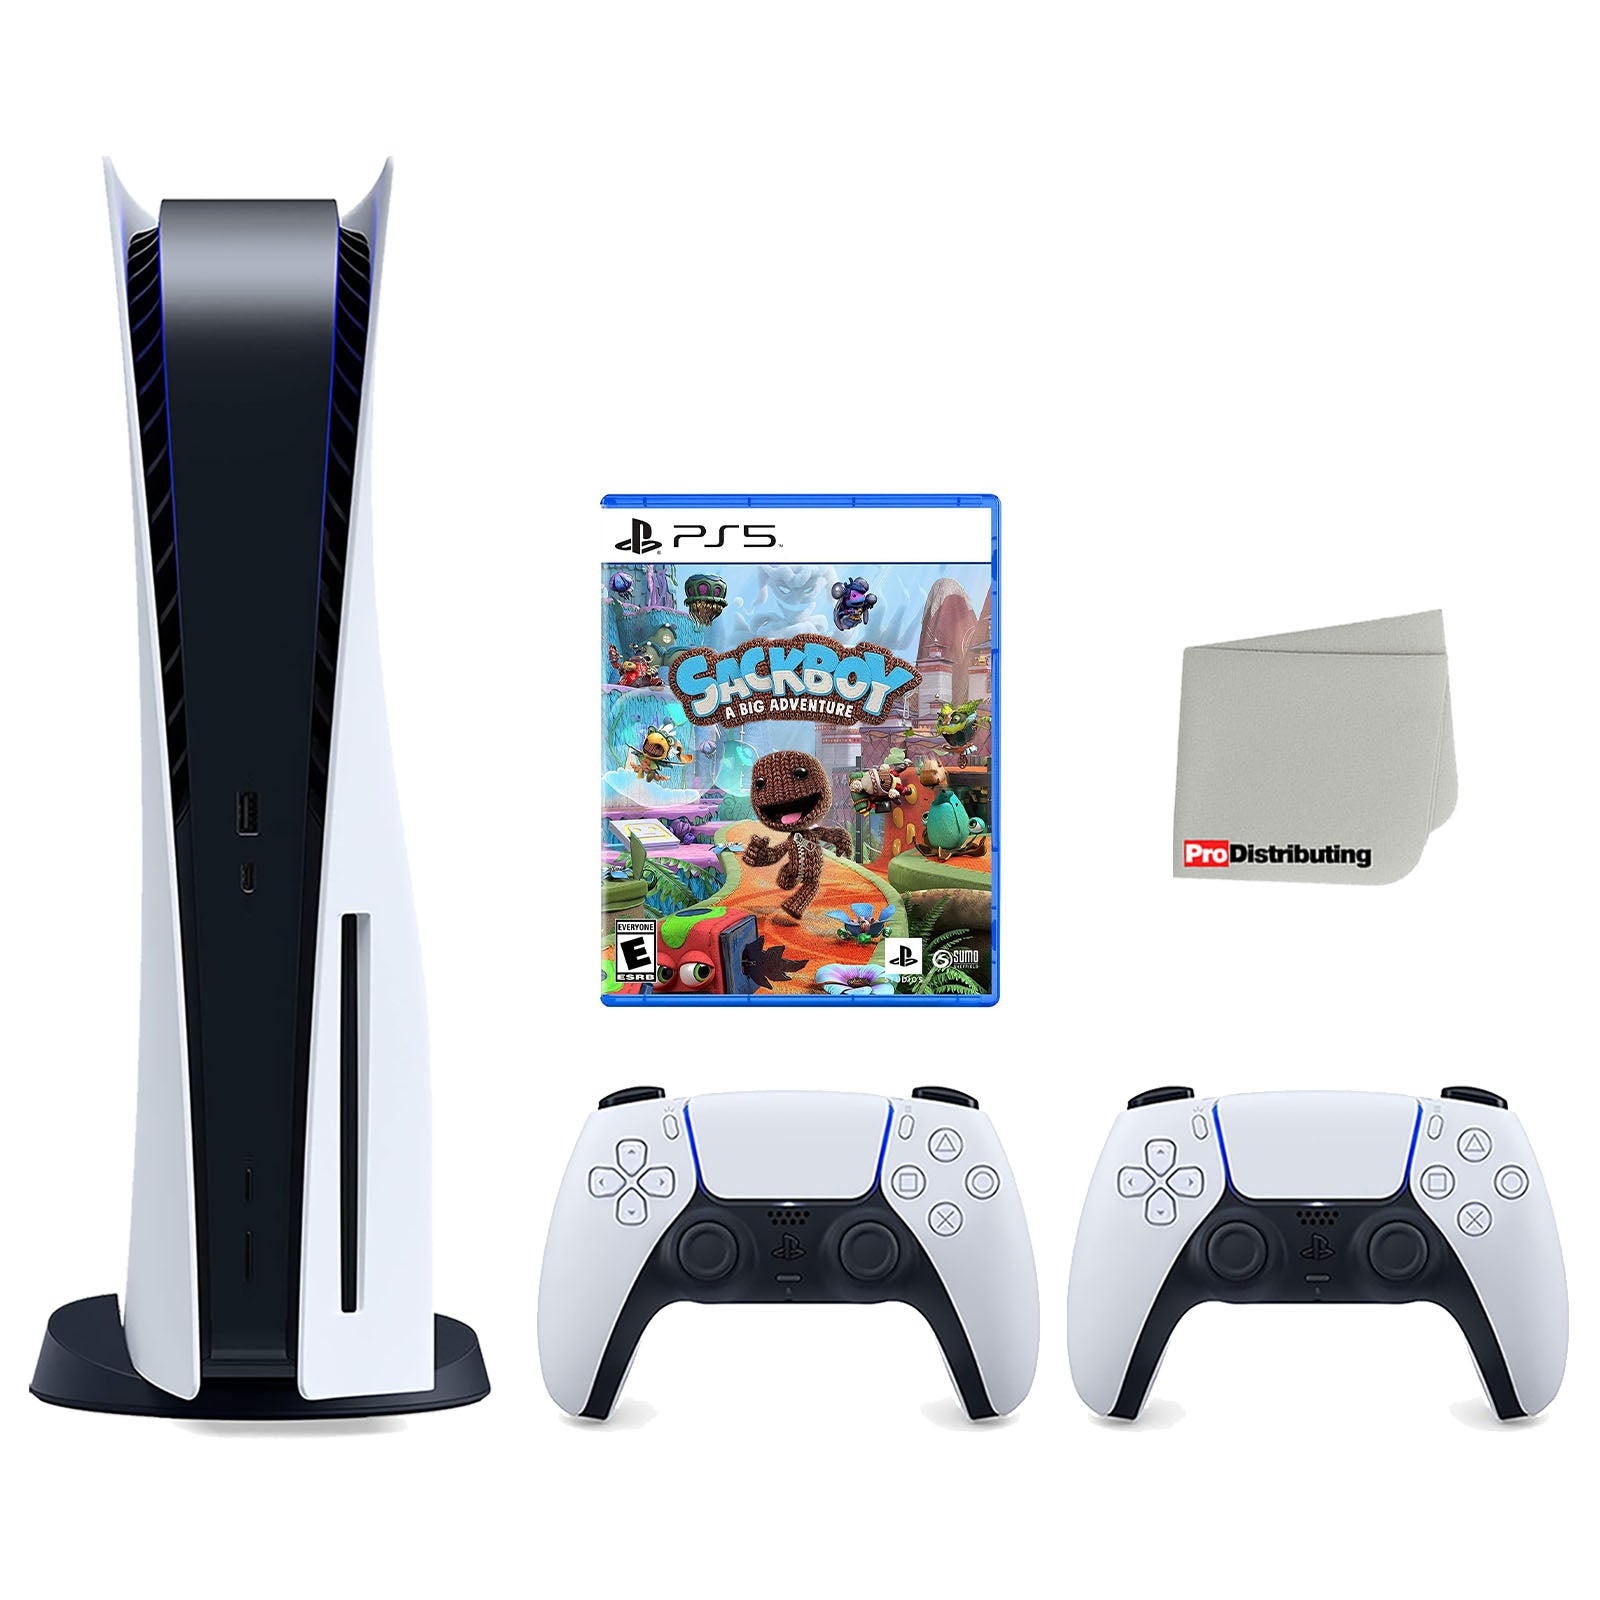 Sony Playstation 5 Disc Version Console with Extra White Controller, Sackboy: A Big Adventure Bundle with Cleaning | Pro-Distributing